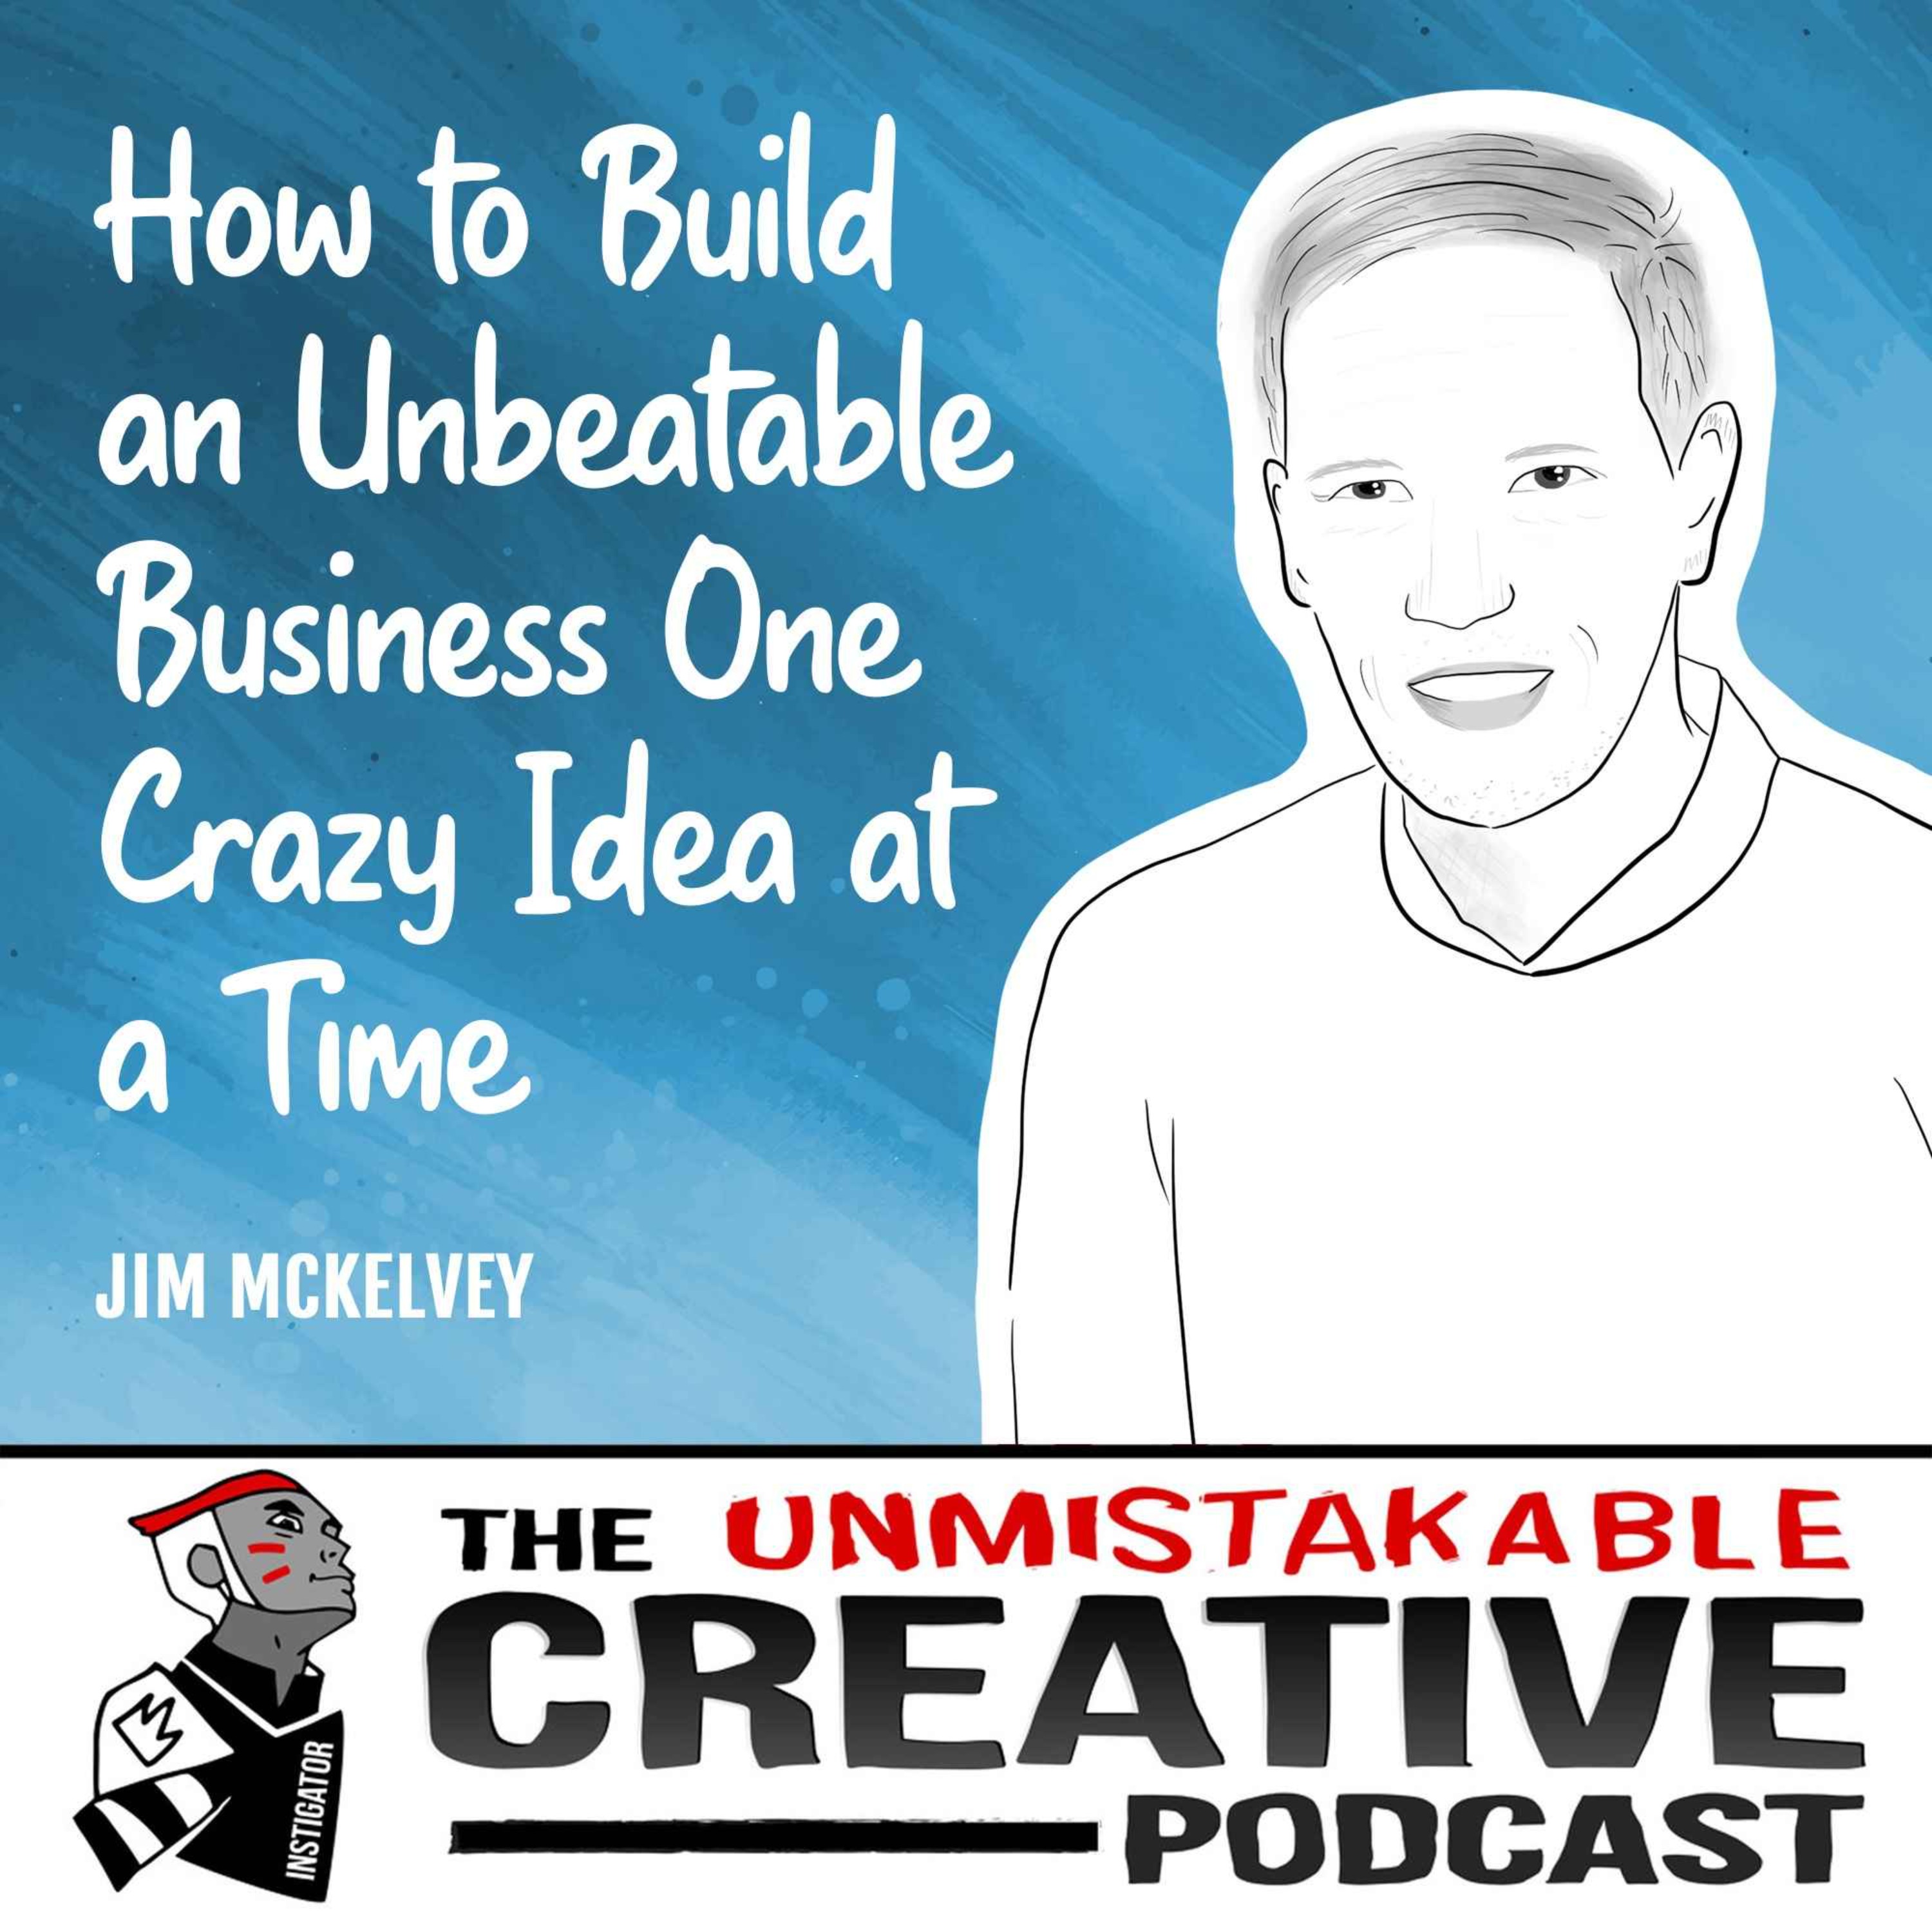 Jim McKelvey | How to Build an Unbeatable Business One Crazy Idea at a Time Image